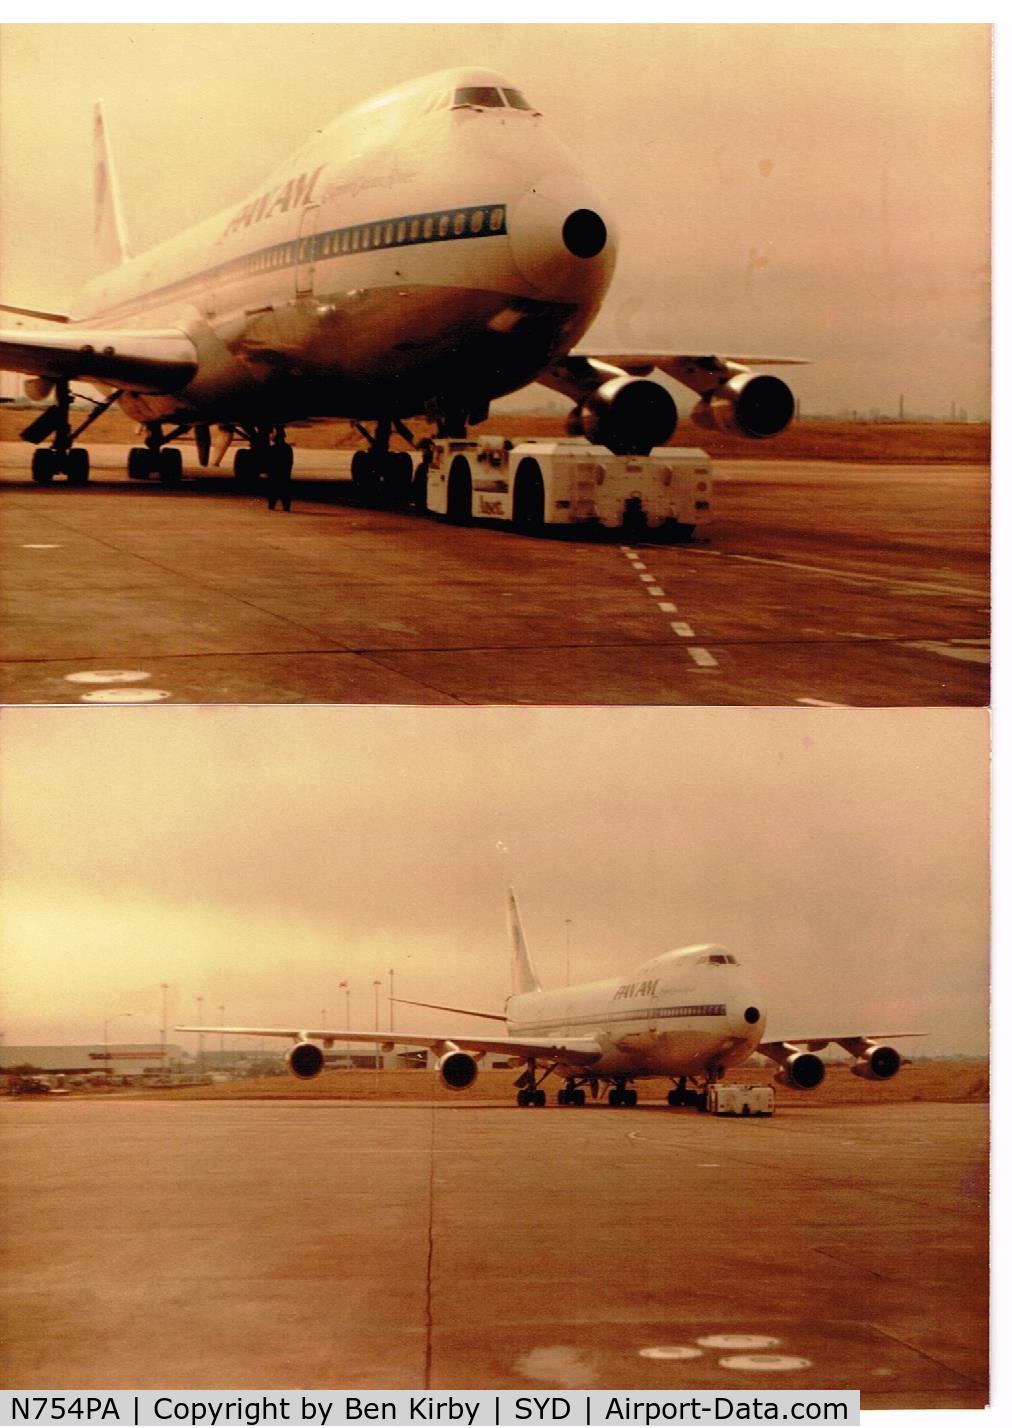 N754PA, 1970 Boeing 747-121 C/N 19658, Taken at Sydney airport in the 80s where I worked.